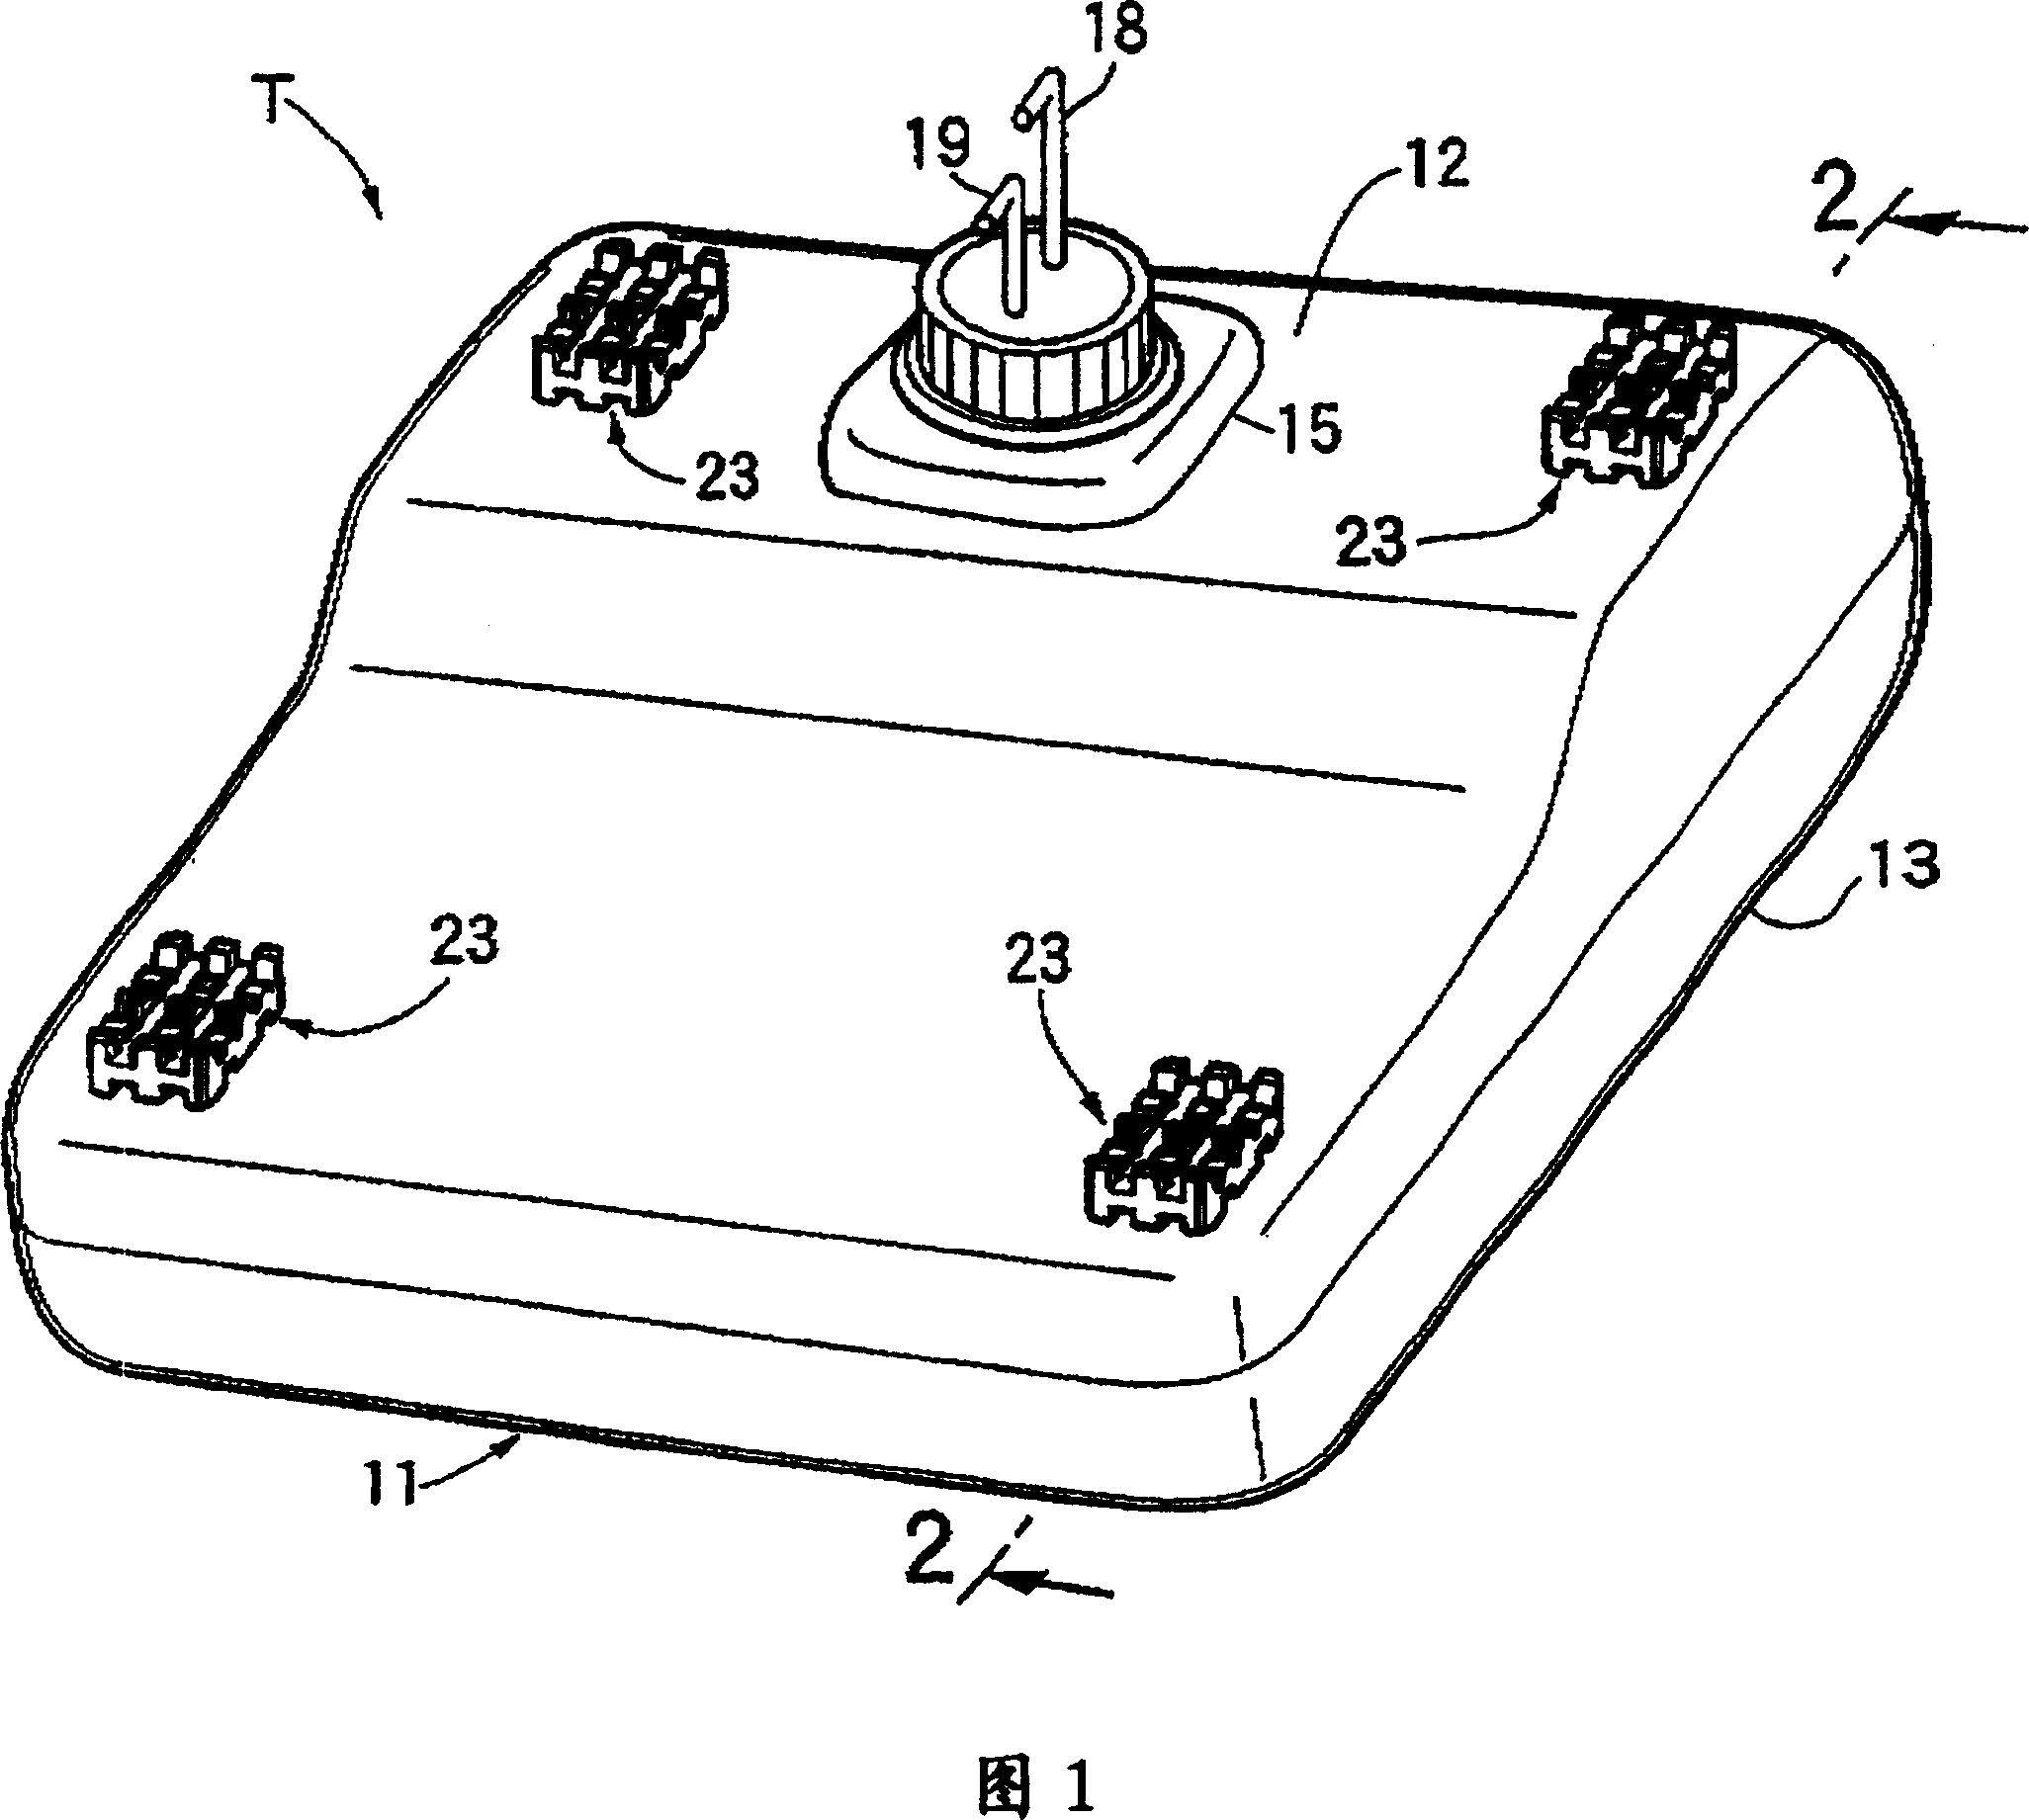 Vibration isolation support structure of fuel tank for vehicle